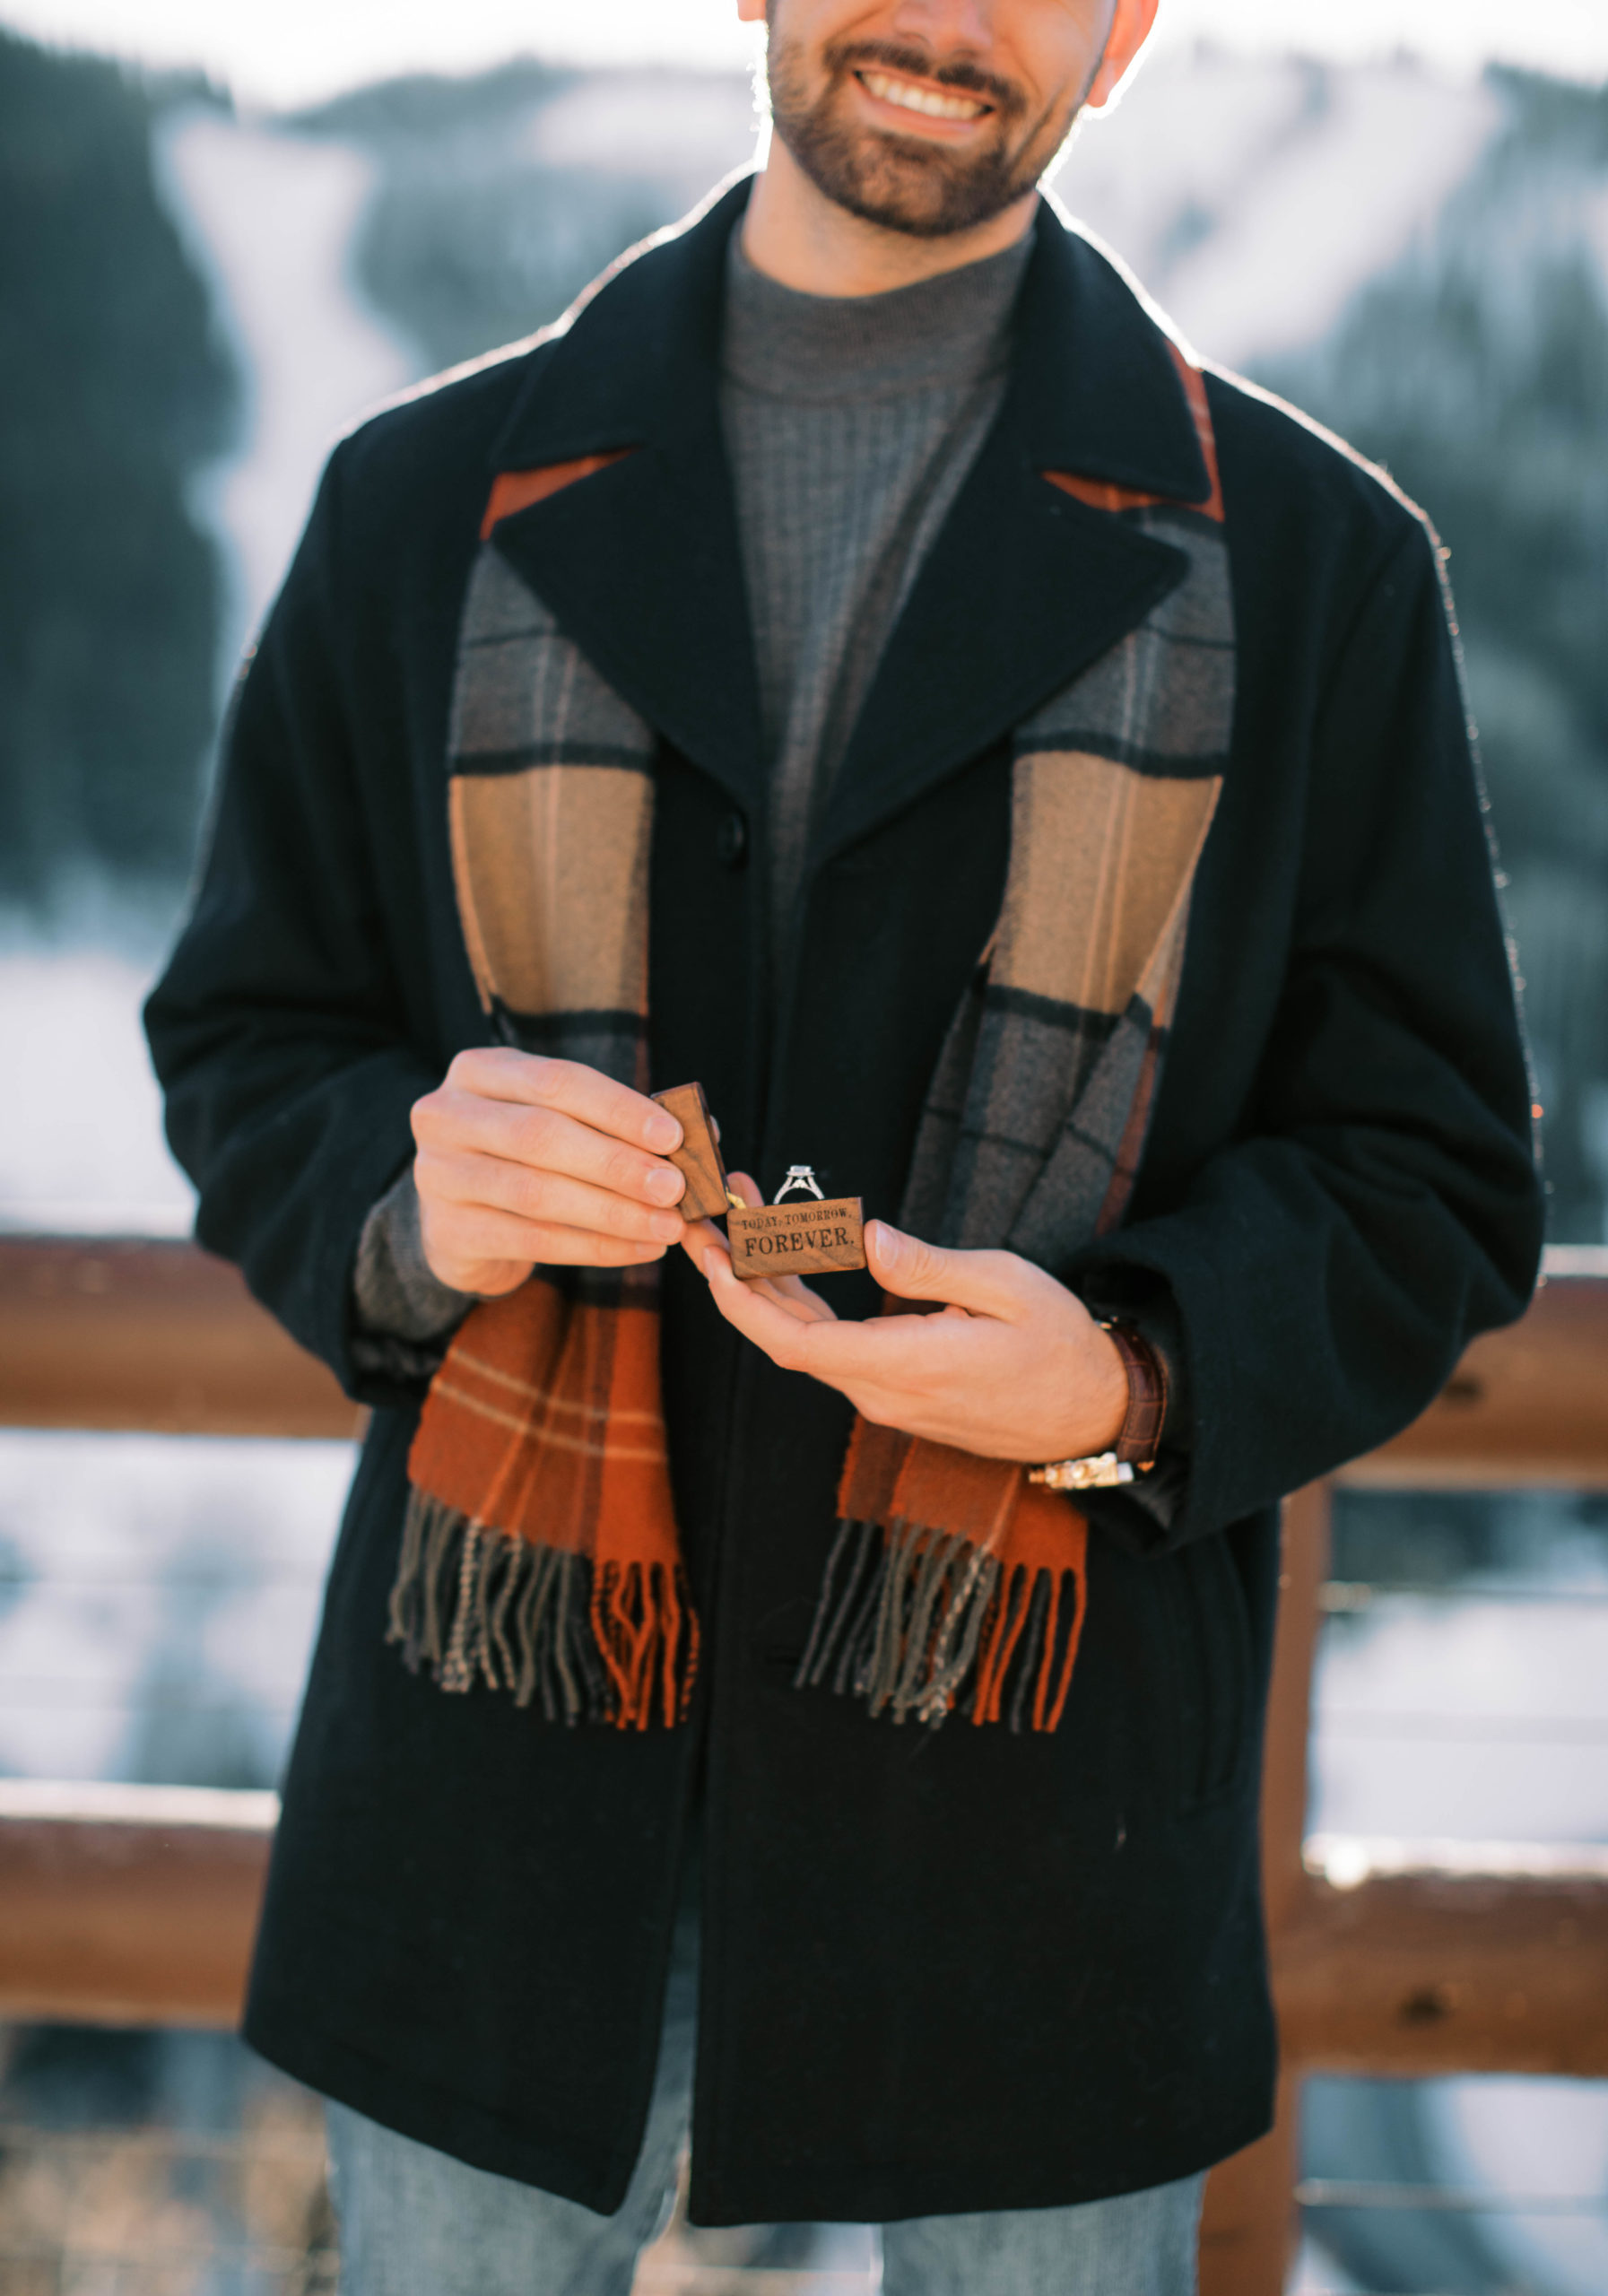 a man poses with an engagement ring box before proposing to his girlfriend at stein eriksen lodge at deer valley ski resort in park city utah. photo taken by Megan Robinson Photography